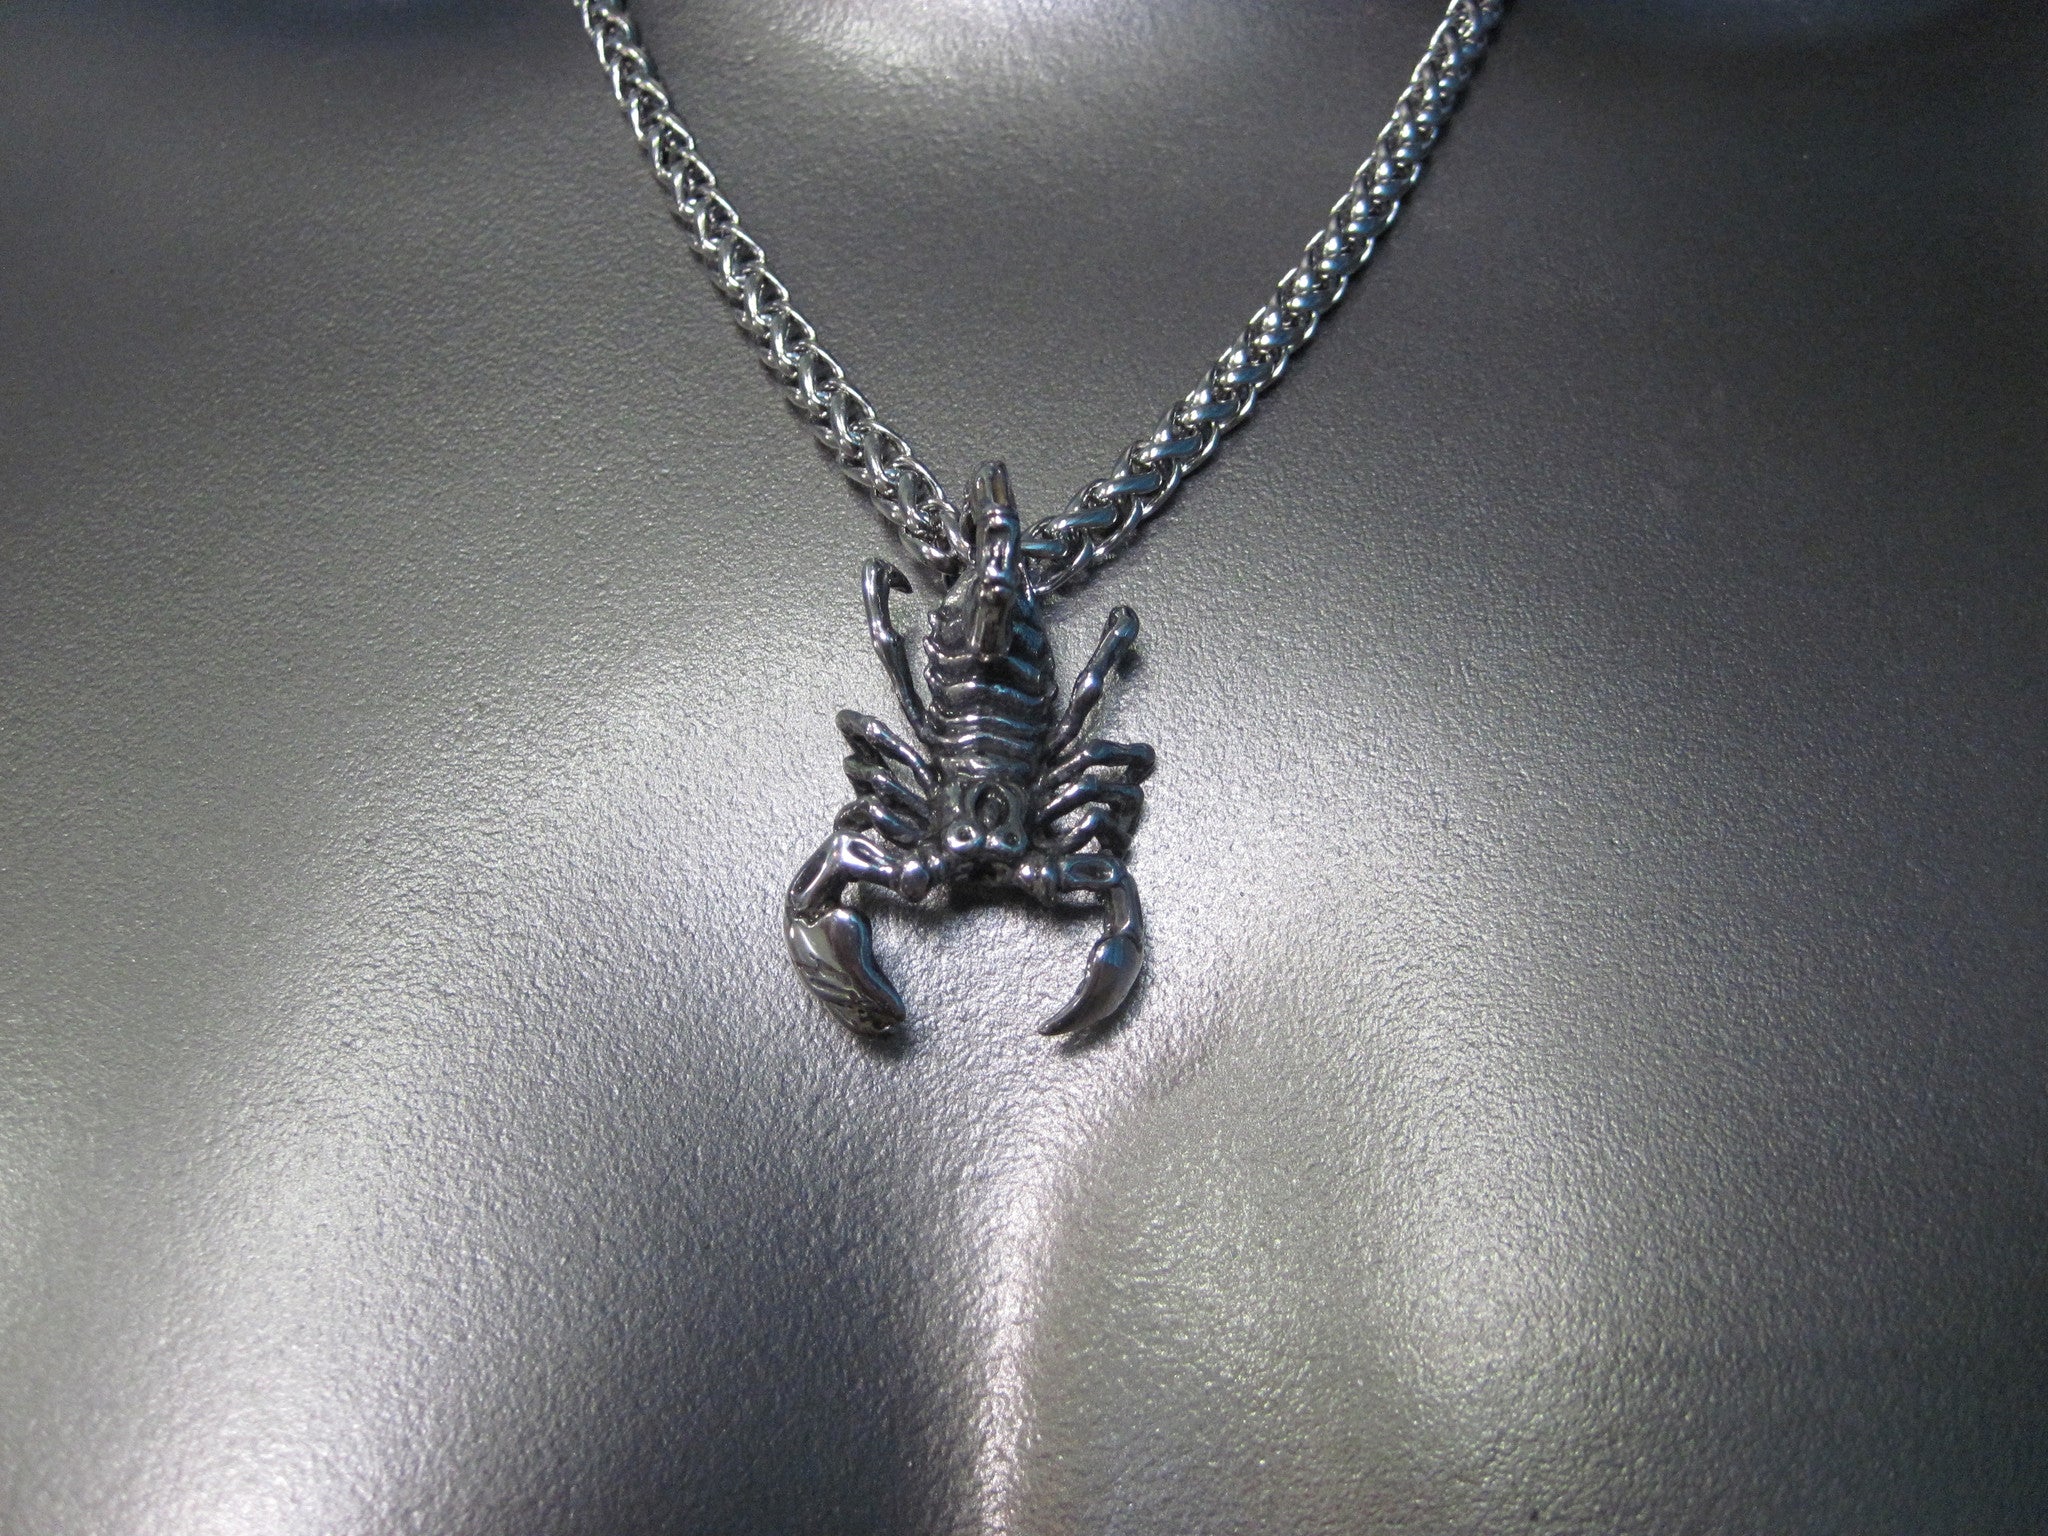 ROUND STAINLESS STEEL CHAIN NECKLACE WITH HEAVYWEIGHT SCORPION PENDANT. by nyet jewelry